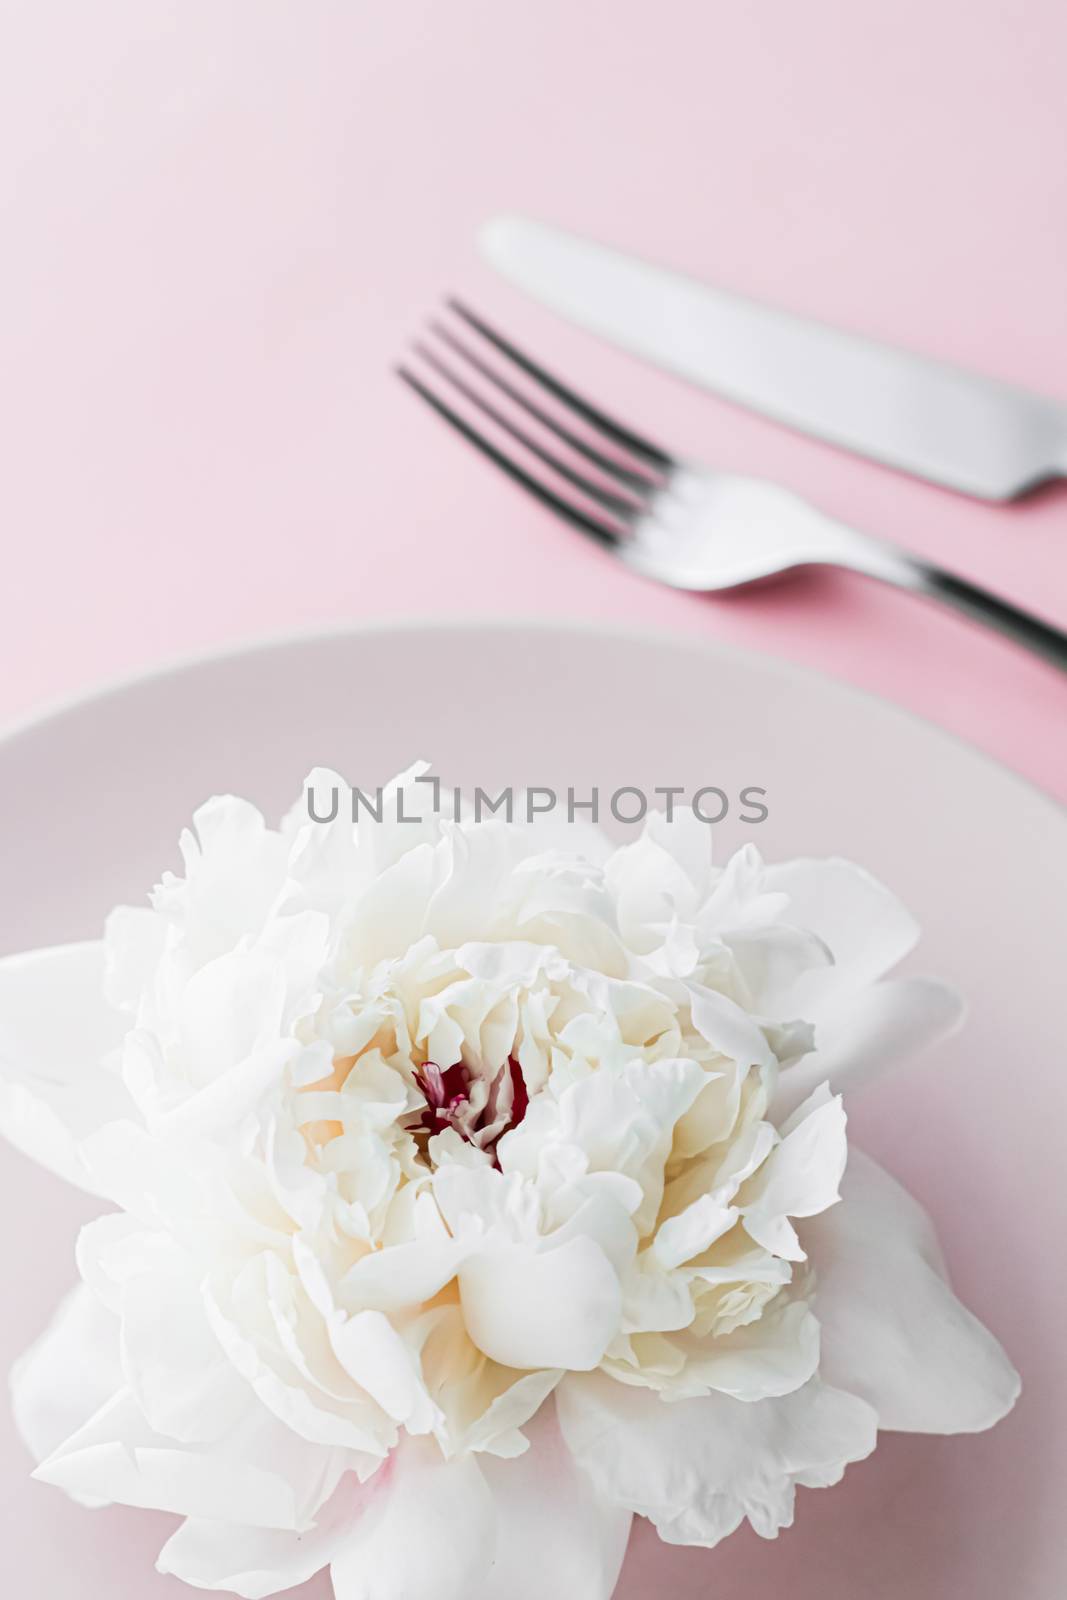 Dining plate and cutlery with peony flower as wedding decor set on pink background, top tableware for event decoration and dessert menu by Anneleven